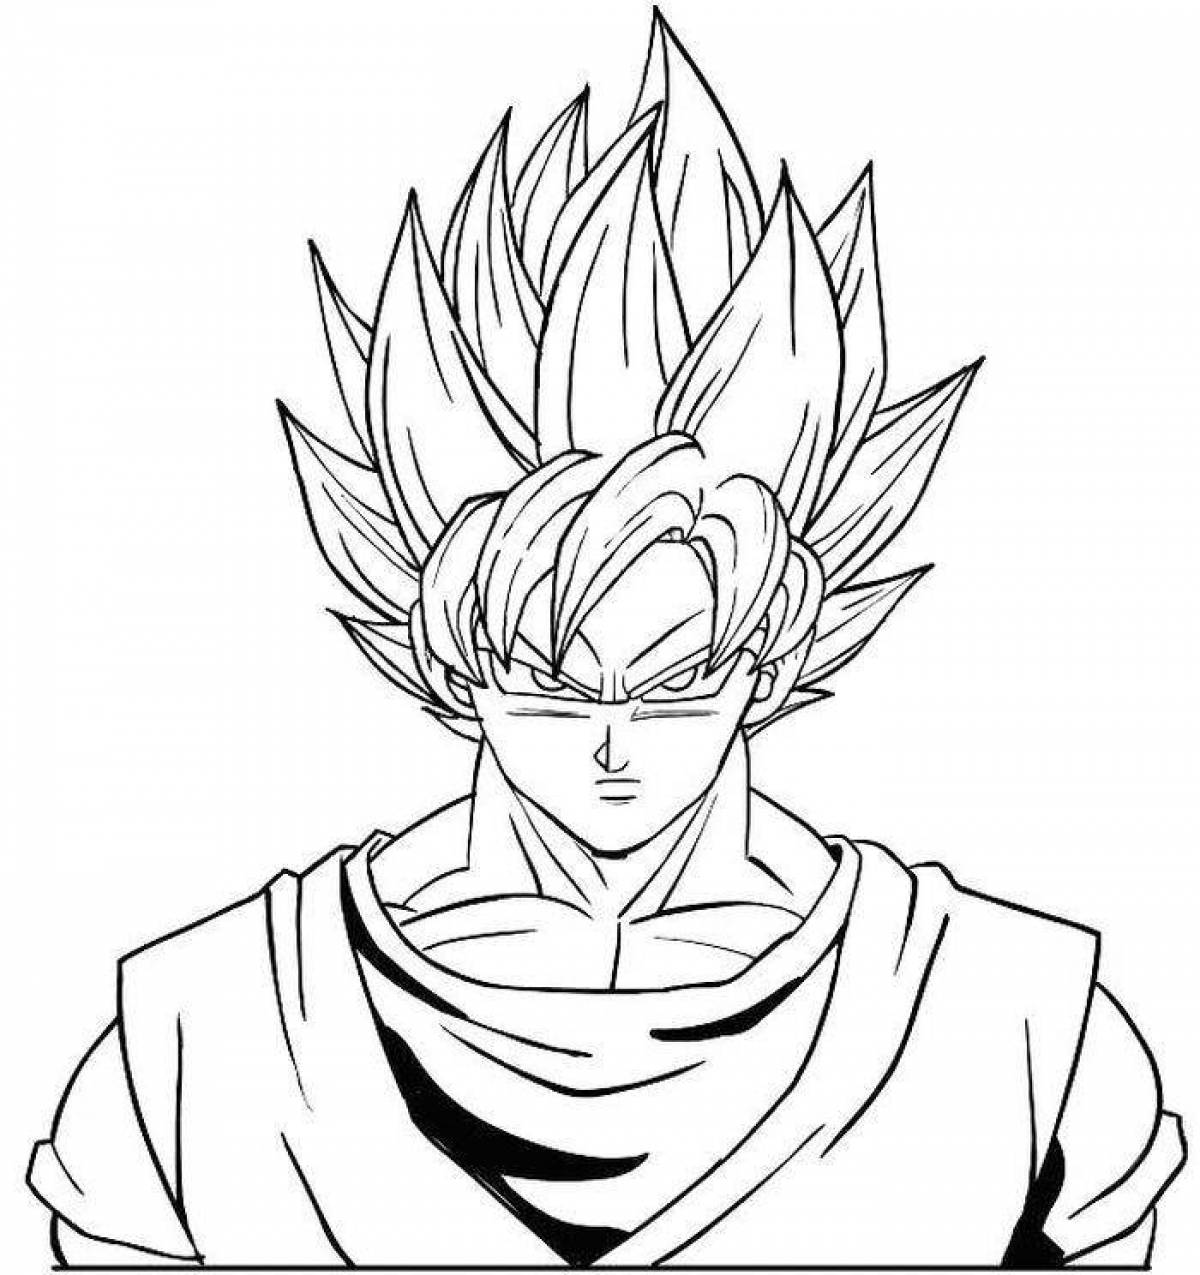 Goku's bold coloring page